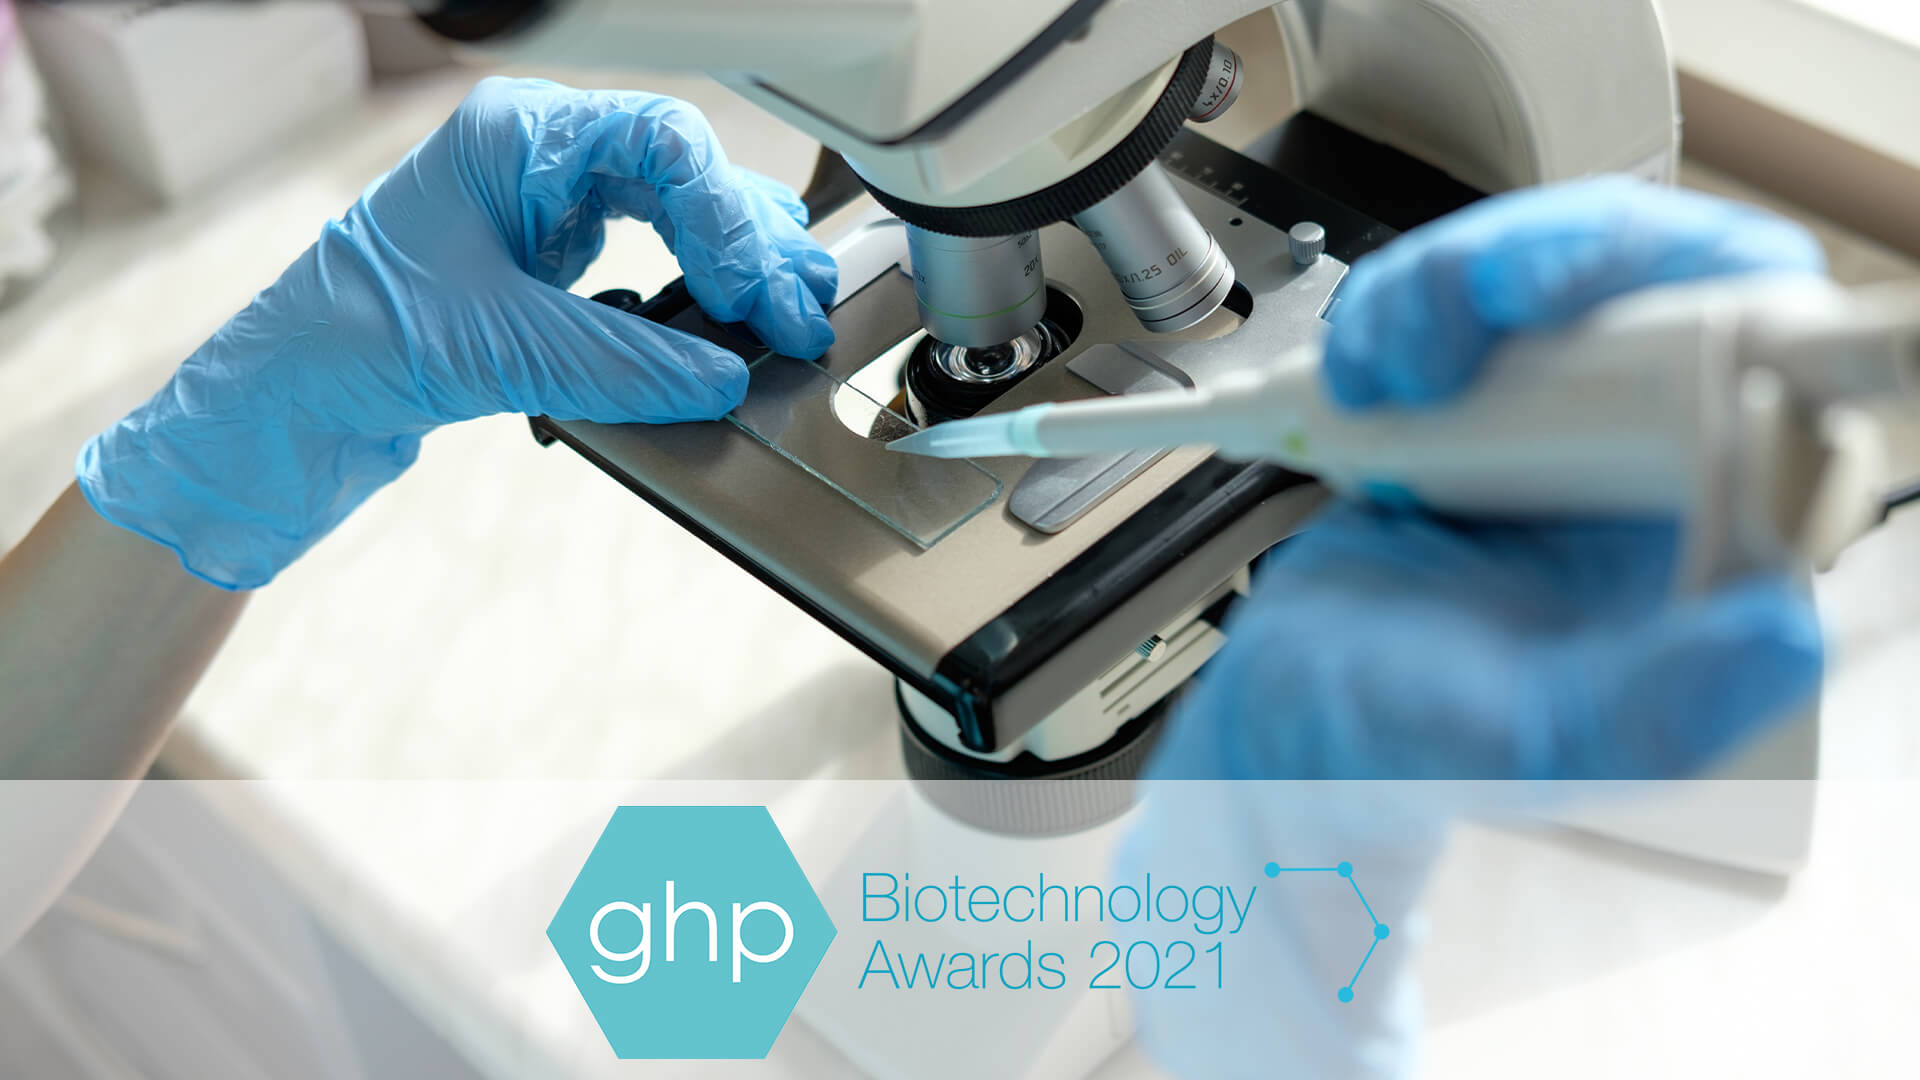 GHP Magazine Announces the Winners of the 2021 Biotechnology Awards